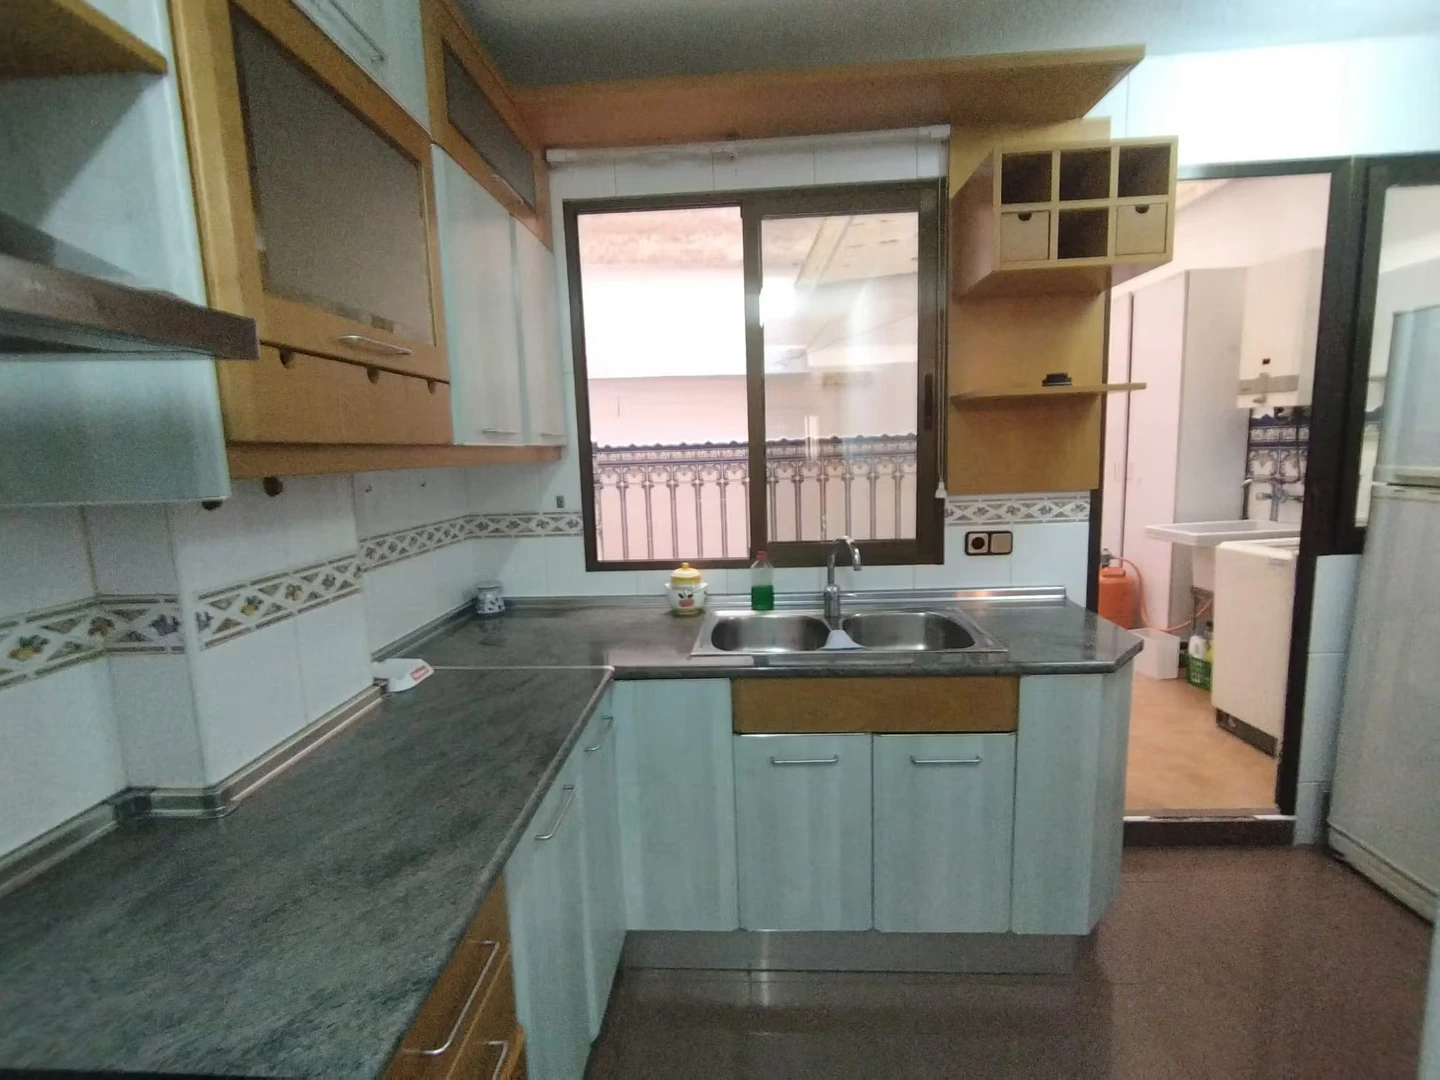 Accommodation with 3 bedrooms in Murcia